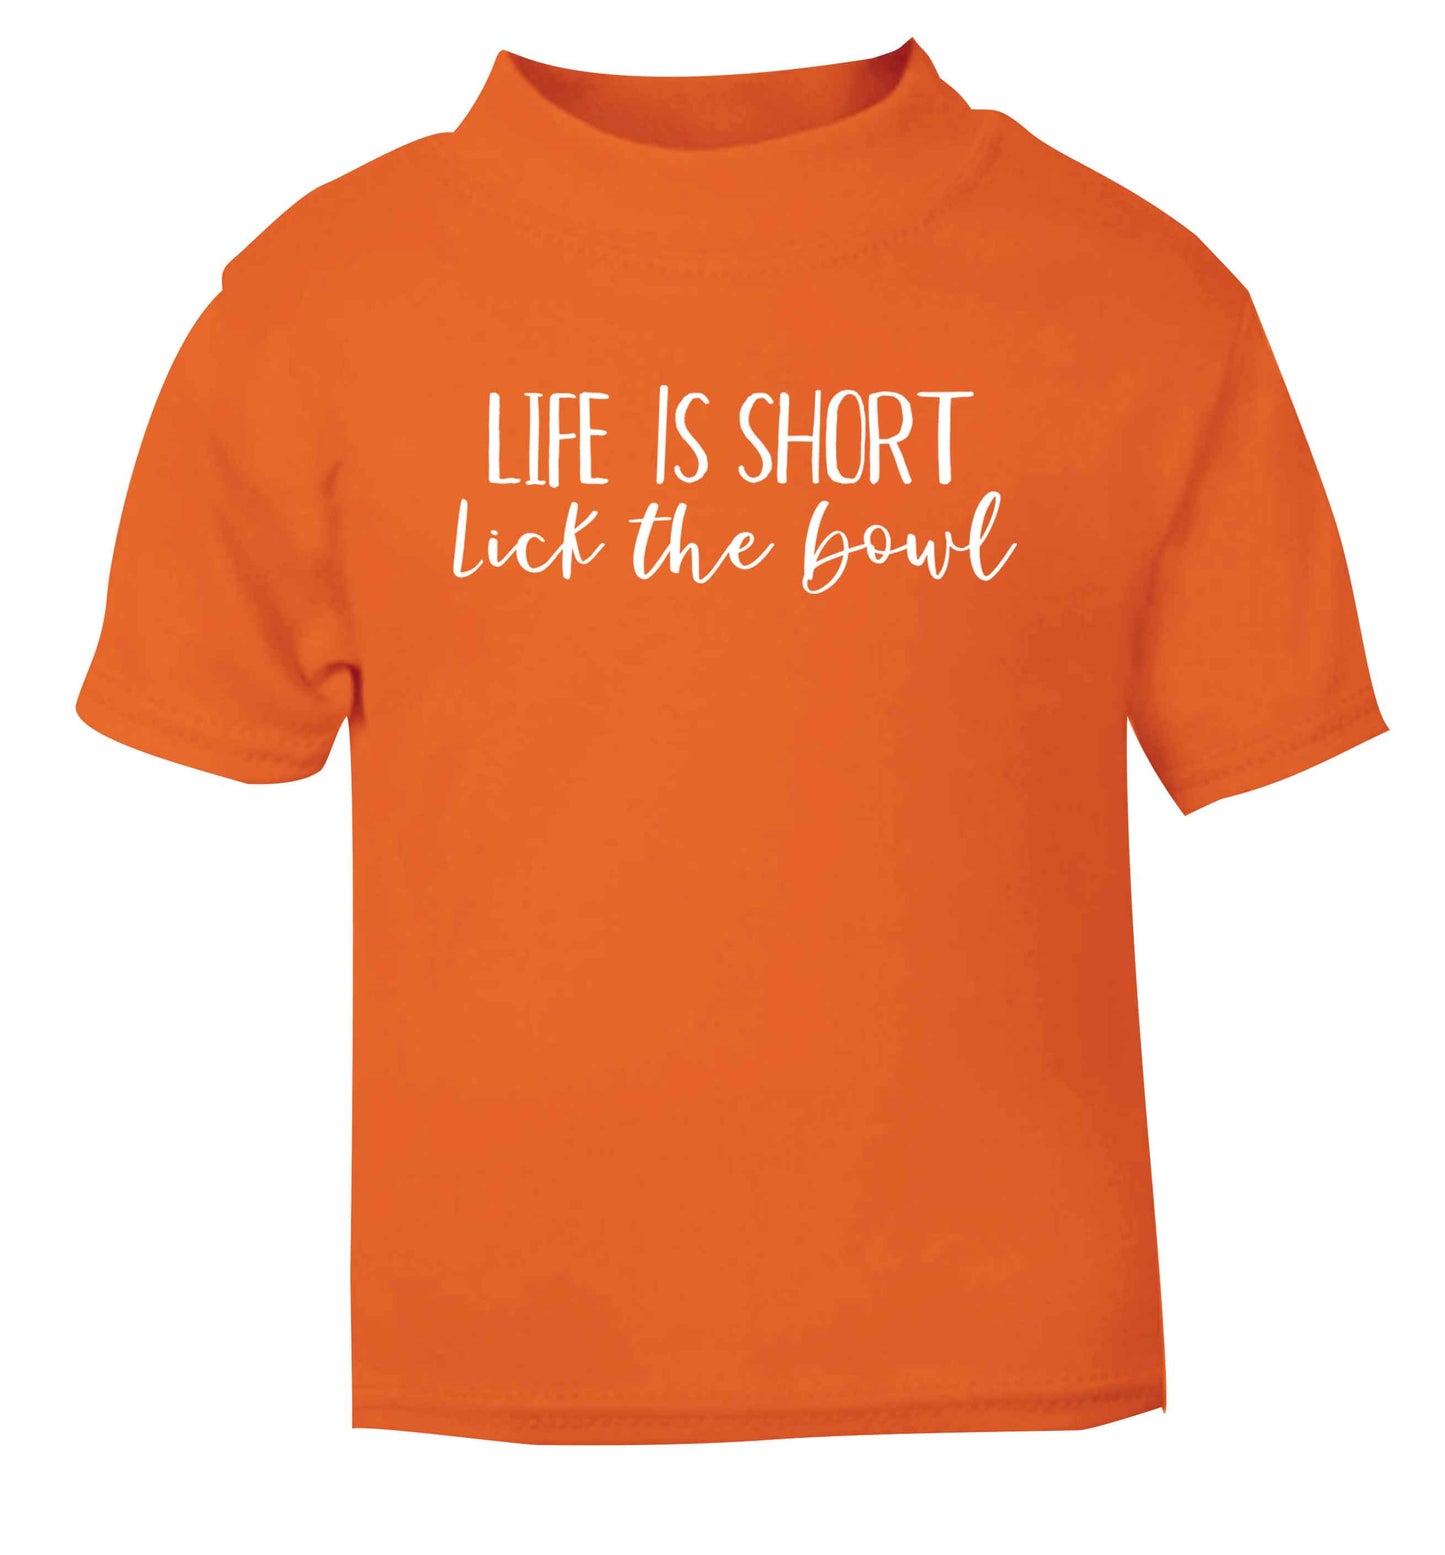 Life is short lick the bowl orange Baby Toddler Tshirt 2 Years